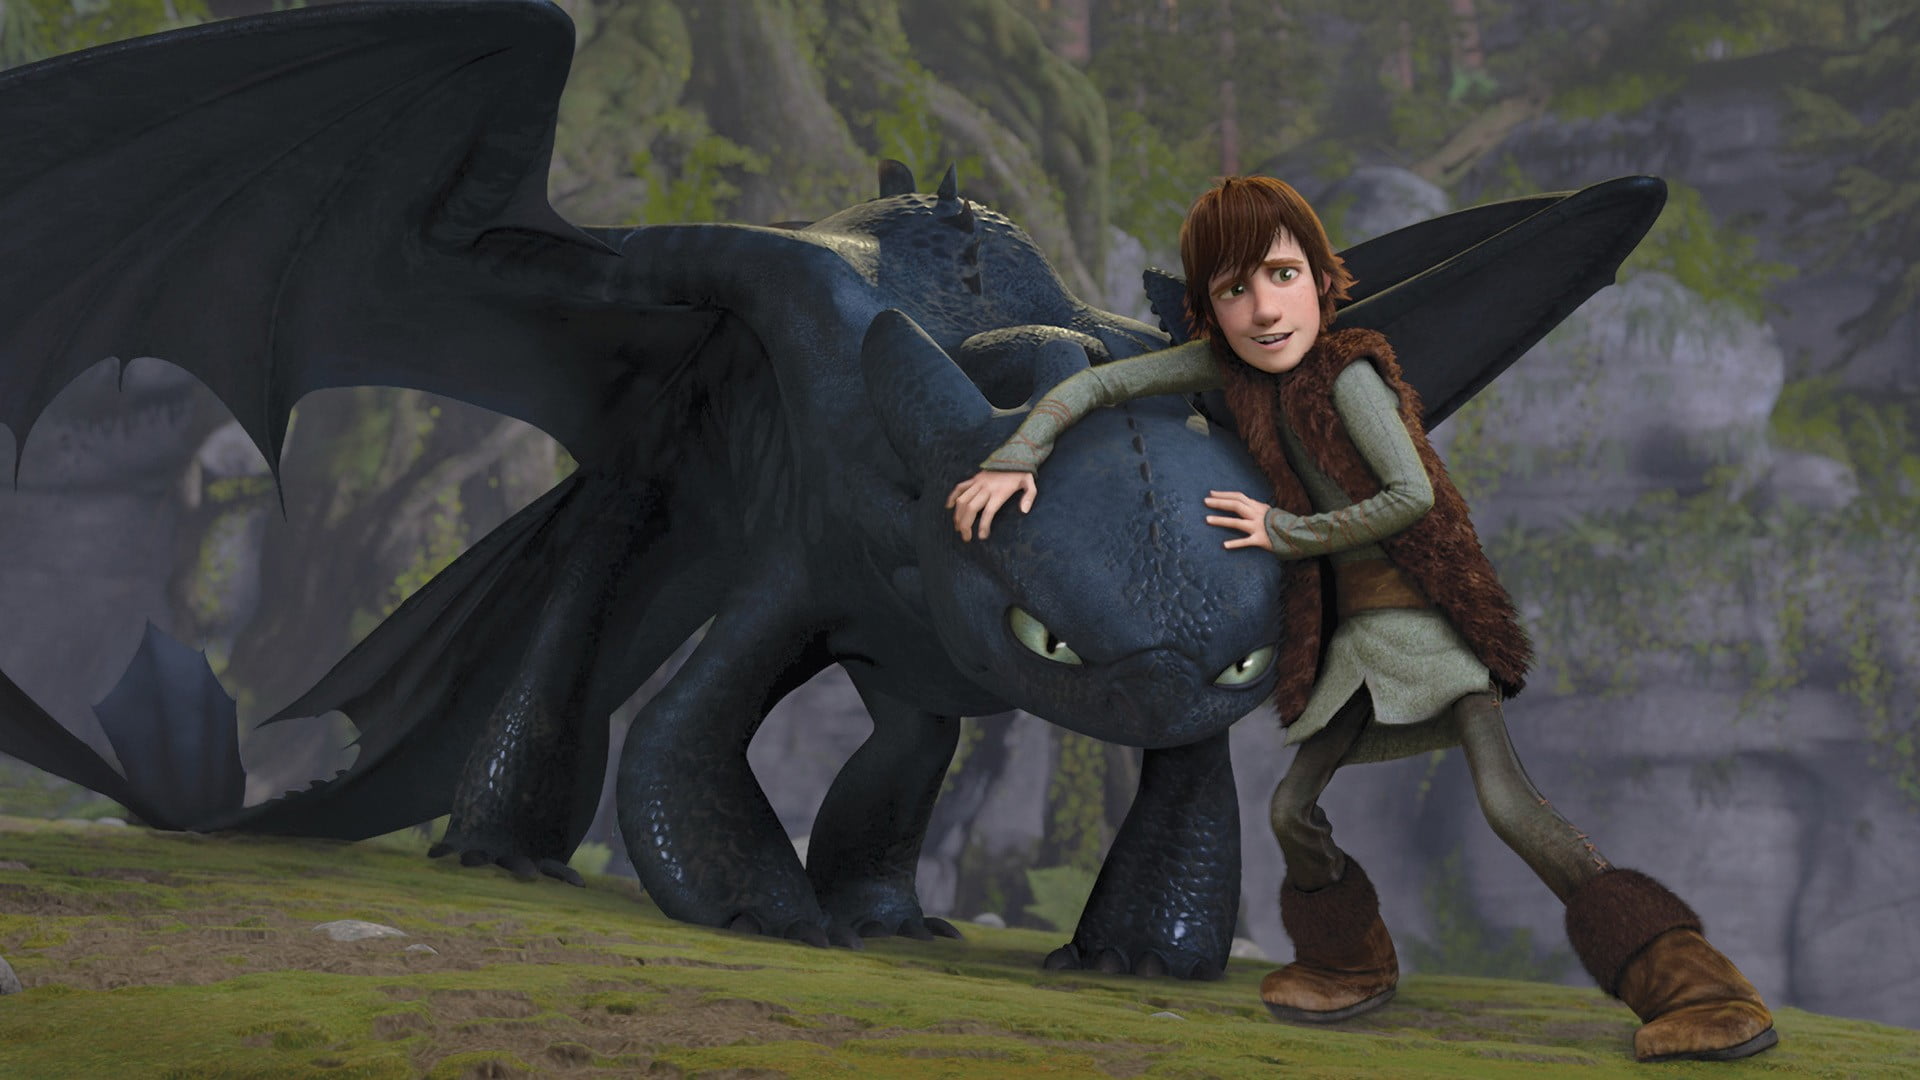 How to train your dragon? wallpaper, Dreamworks, movies, animated movies